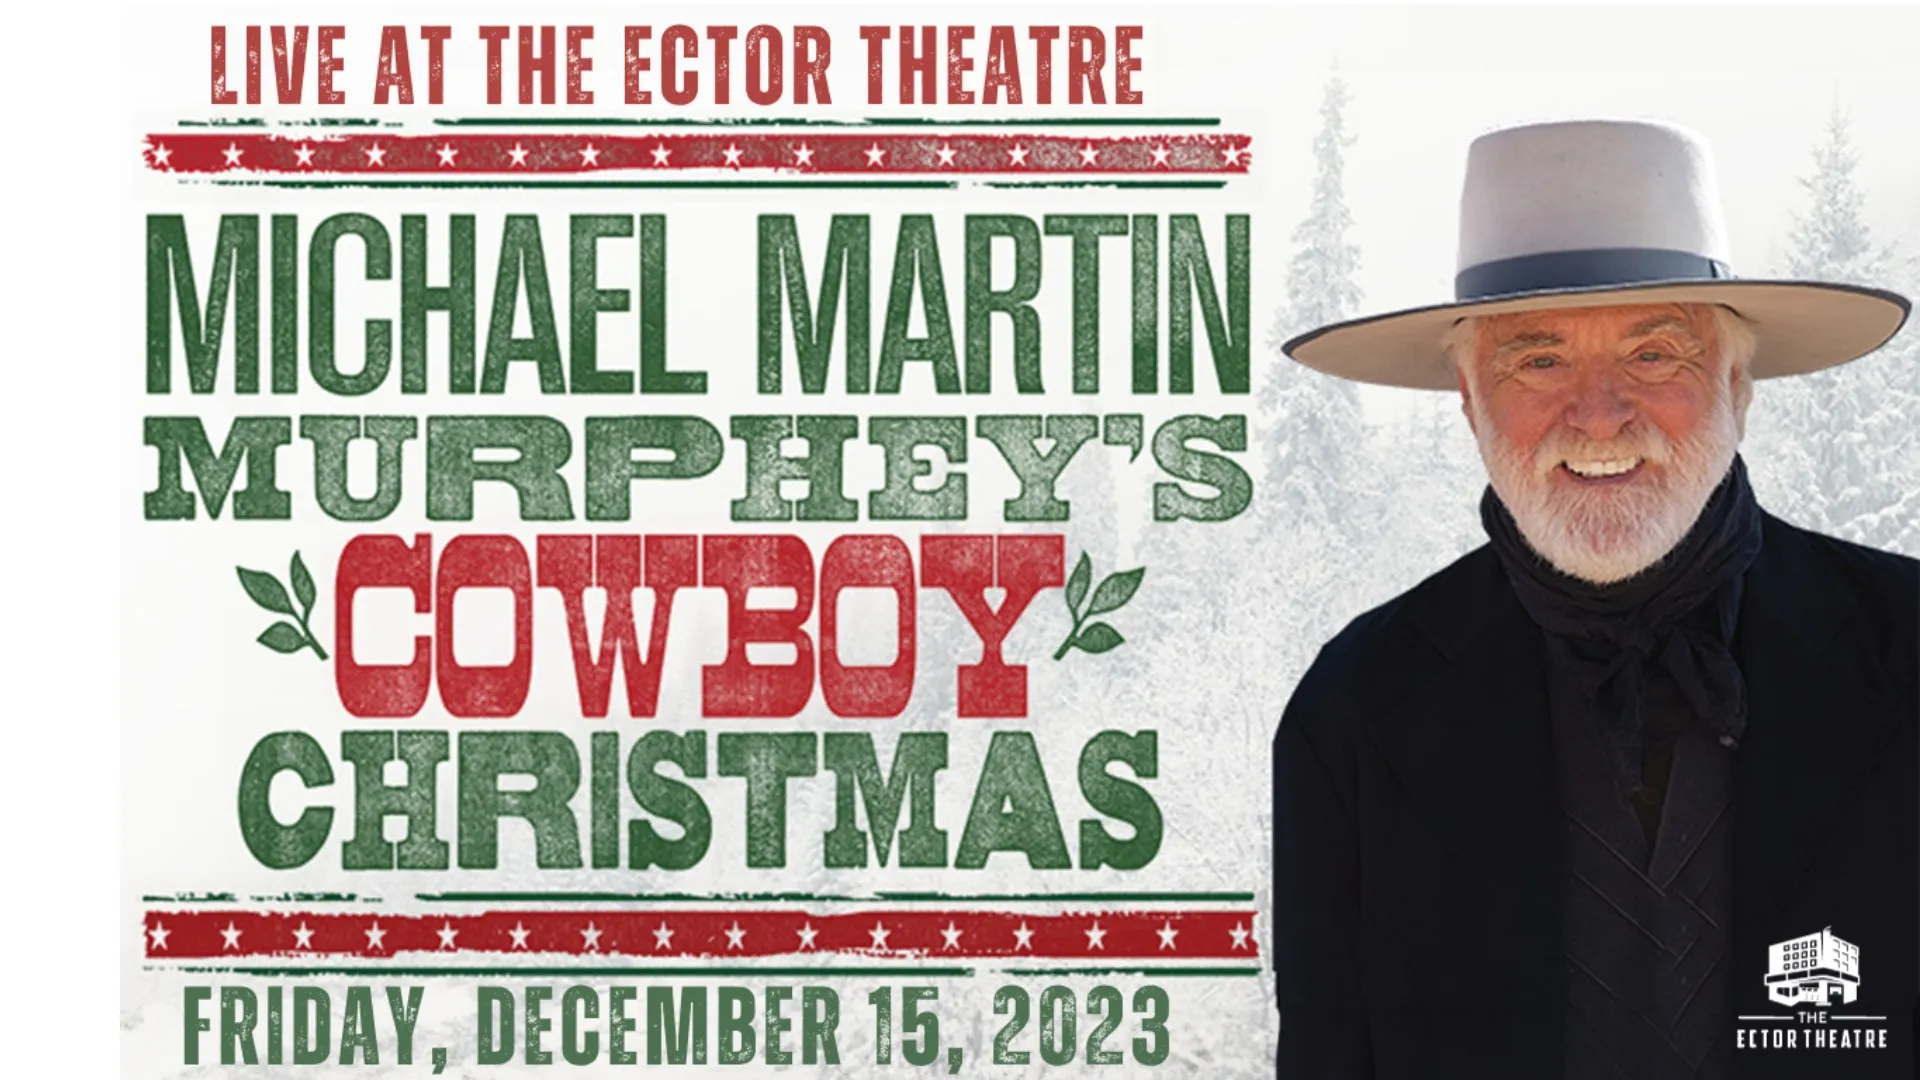 Michael Murphy at The Ector Theatre on December 15, 2023